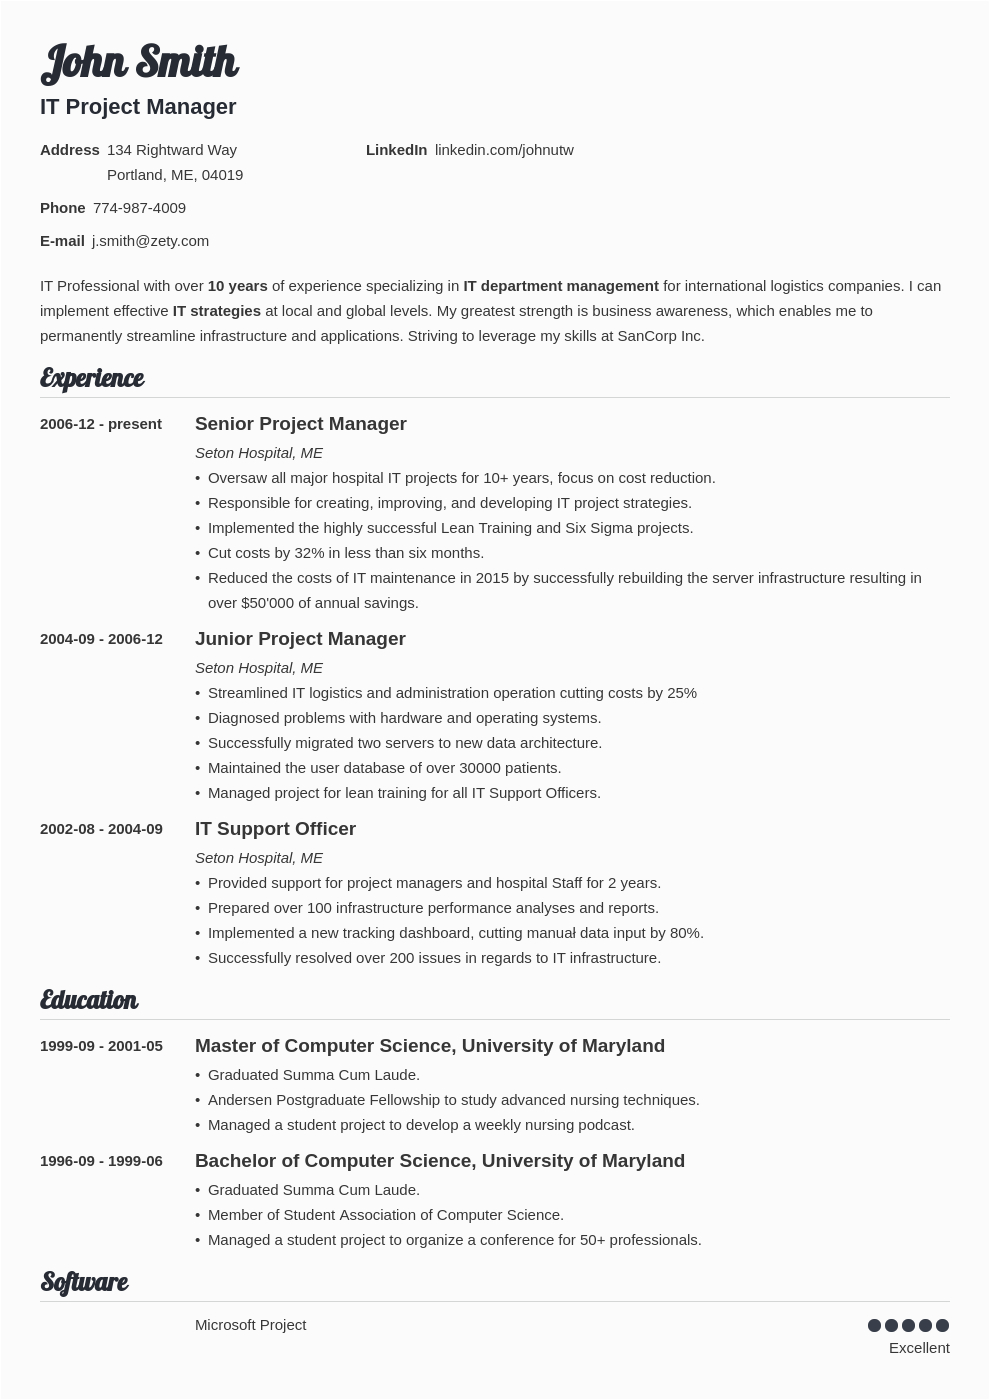 Best Resume Templates for It Professionals Best Resume Templates for 2021 14 top Picks to Download